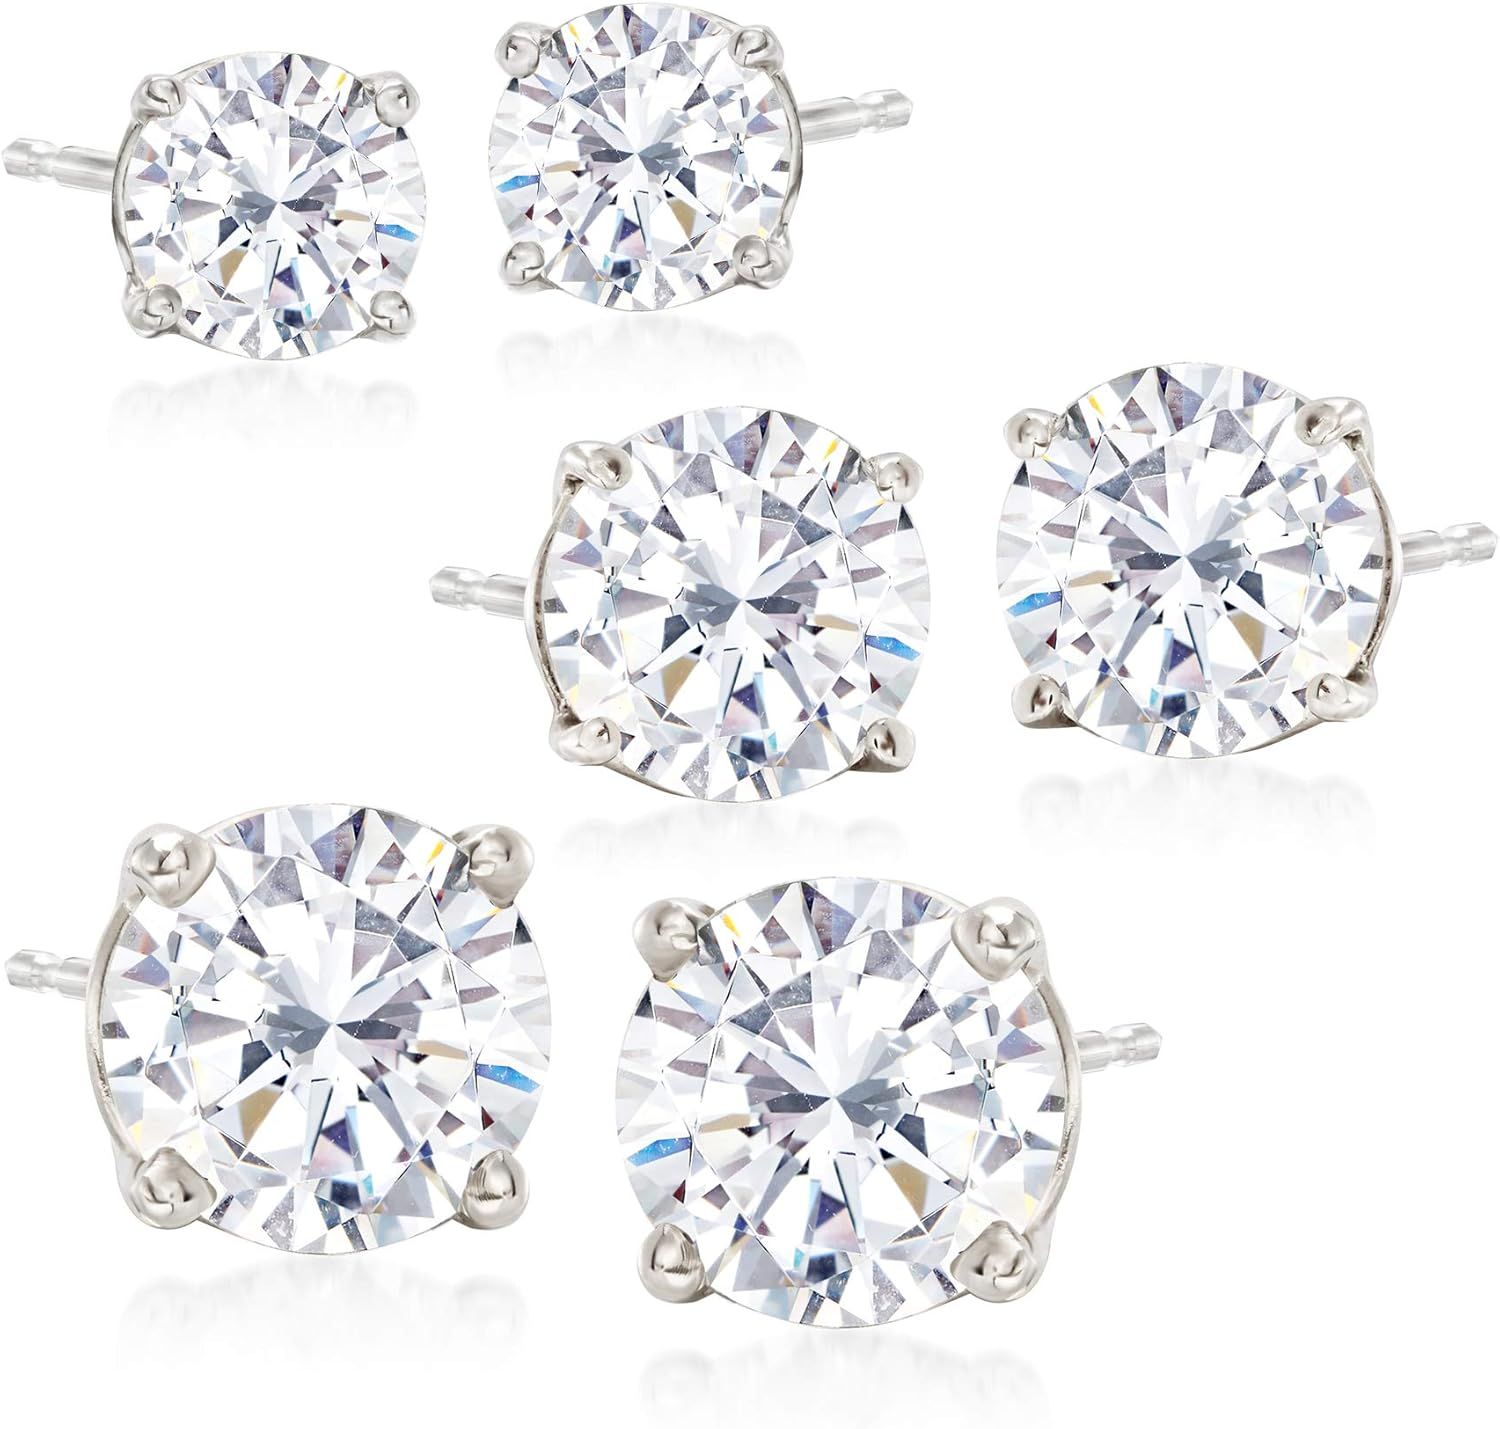 Ross-Simons 6.00 ct. t.w. CZ Jewelry Set: 3 Pairs Of Stud Earrings in Sterling Silver | Amazon (US)